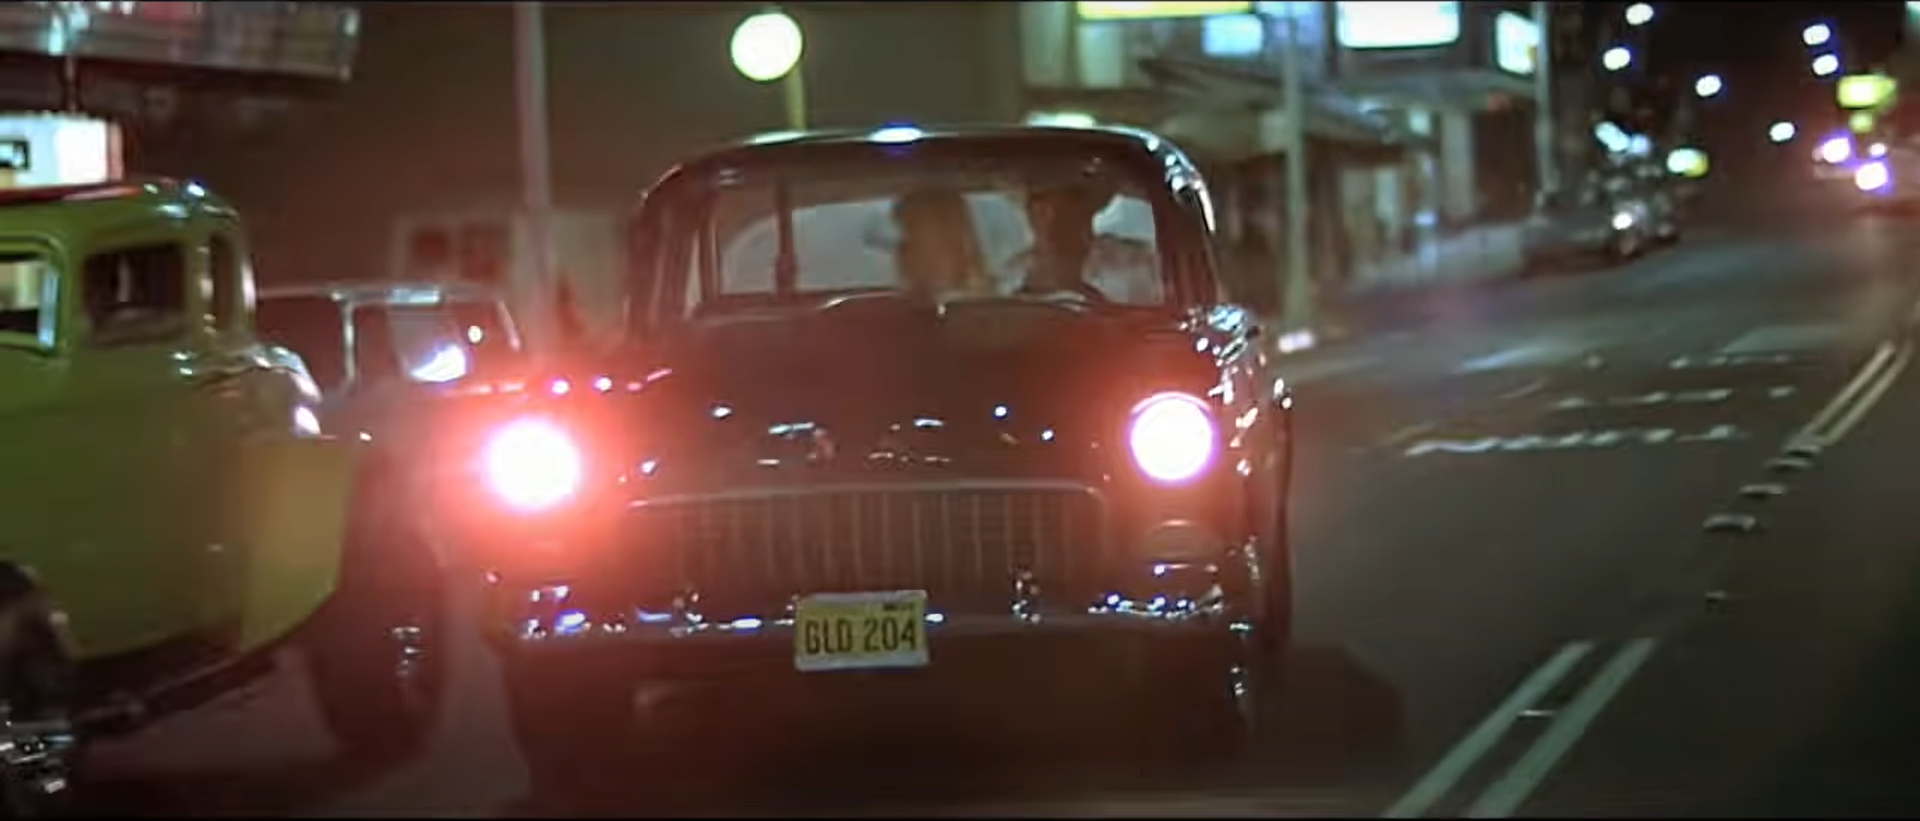 AMERICAN GRAFFITI - Bob Falfa's (Harrison Ford) Screen-Matched 55 Chevy License Plate - Image 5 of 6